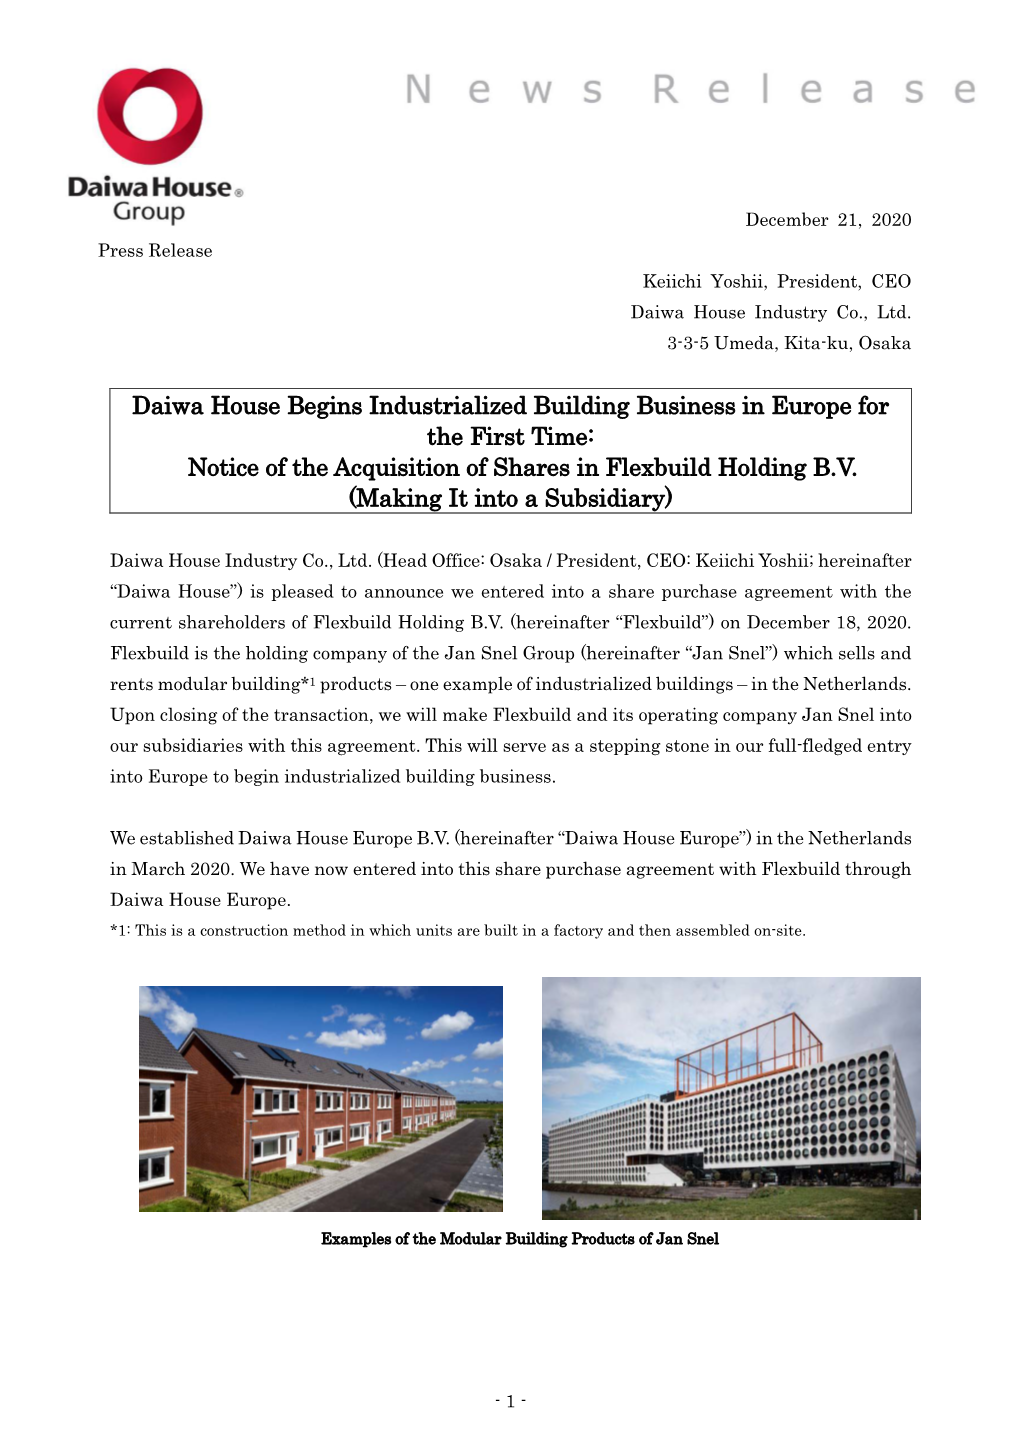 Daiwa House Begins Industrialized Building Business in Europe for the First Time: Notice of the Acquisition of Shares in Flexbuild Holding B.V